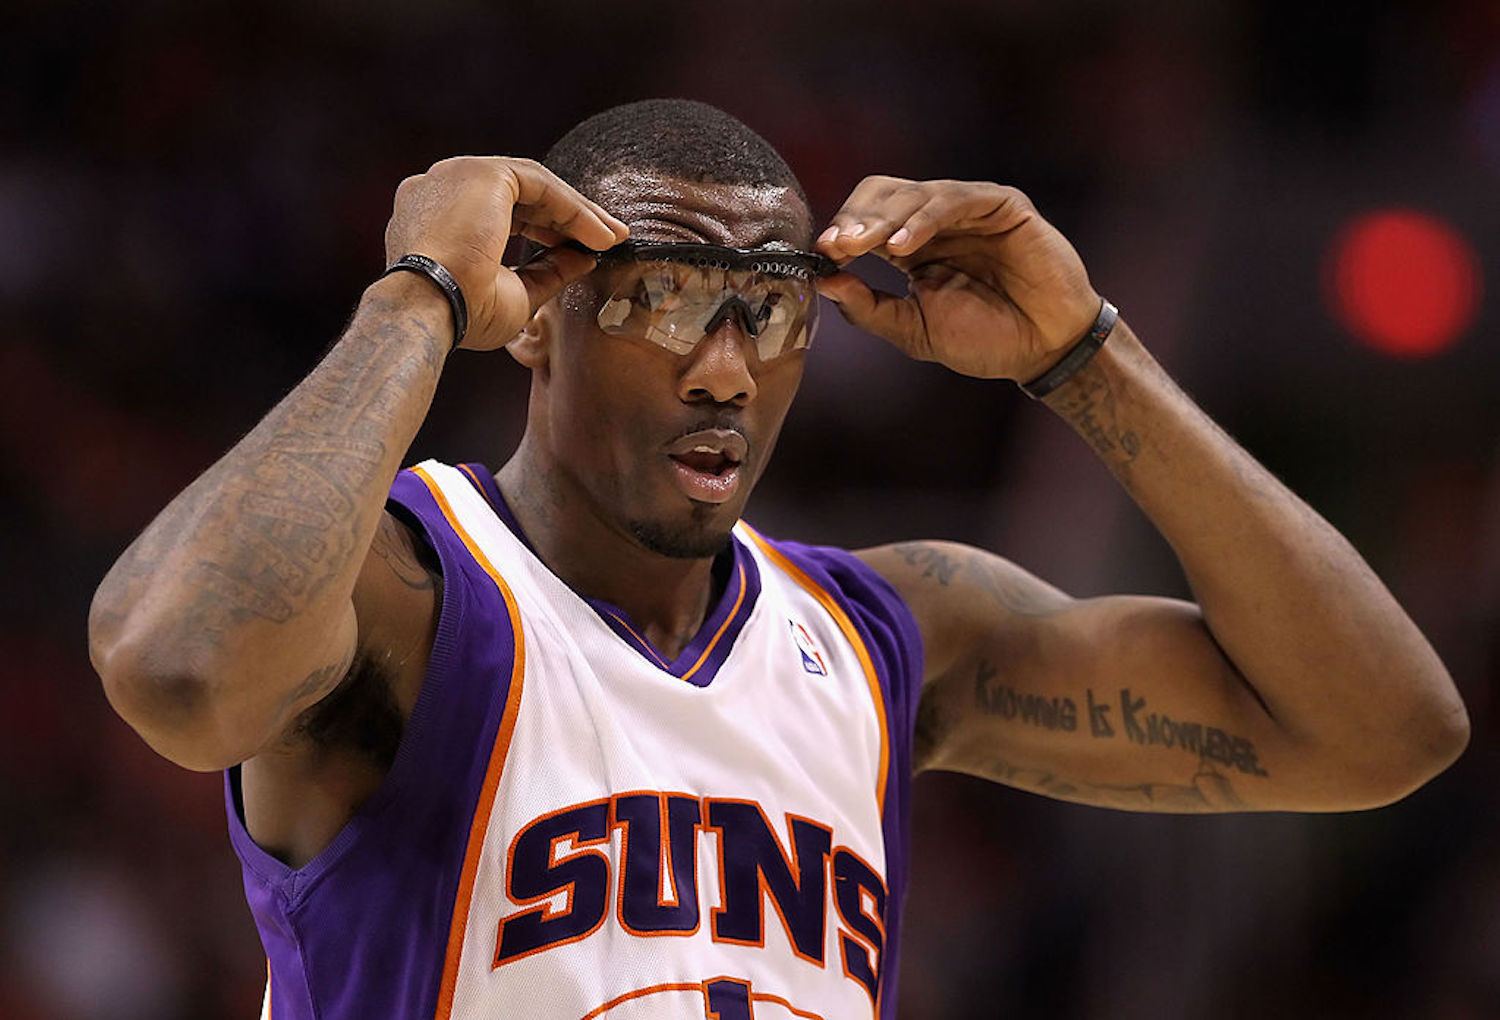 When Amar'e Stoudemire cashed his first NBA check, he decided to use his first purchases to help his mother and brother.